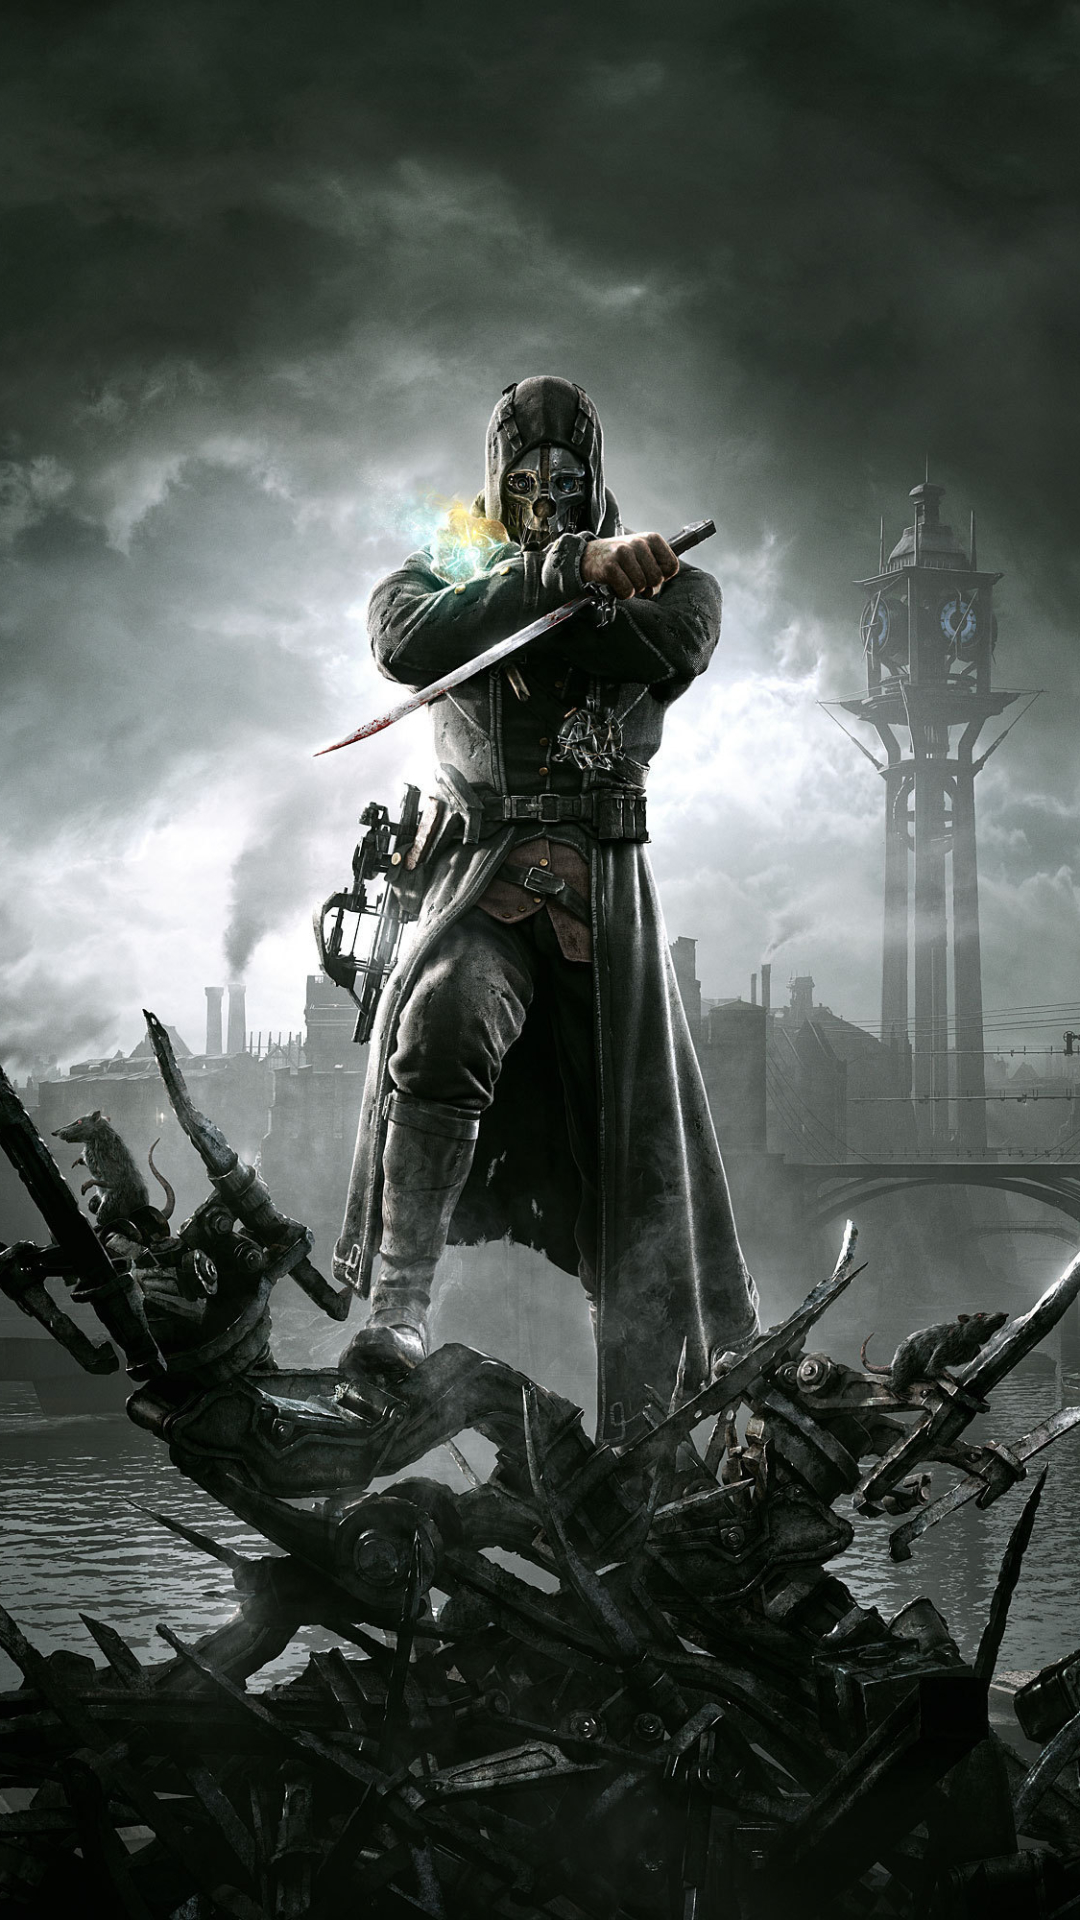 dishonored, video game, assassin, corvo attano, post apocalyptic, warrior cell phone wallpapers